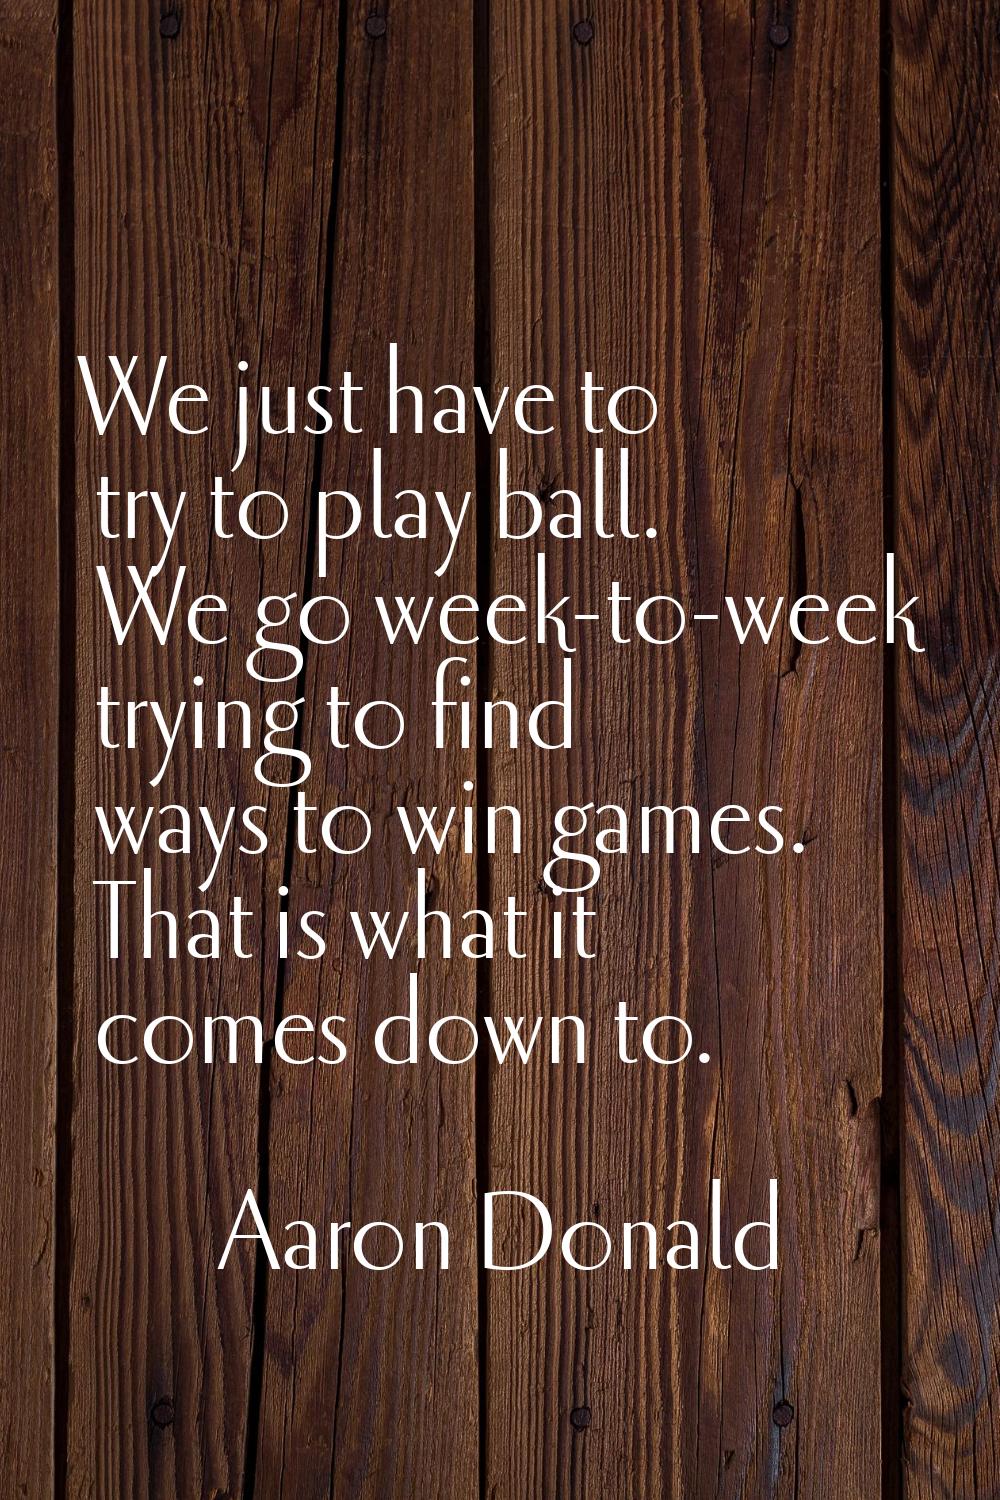 We just have to try to play ball. We go week-to-week trying to find ways to win games. That is what